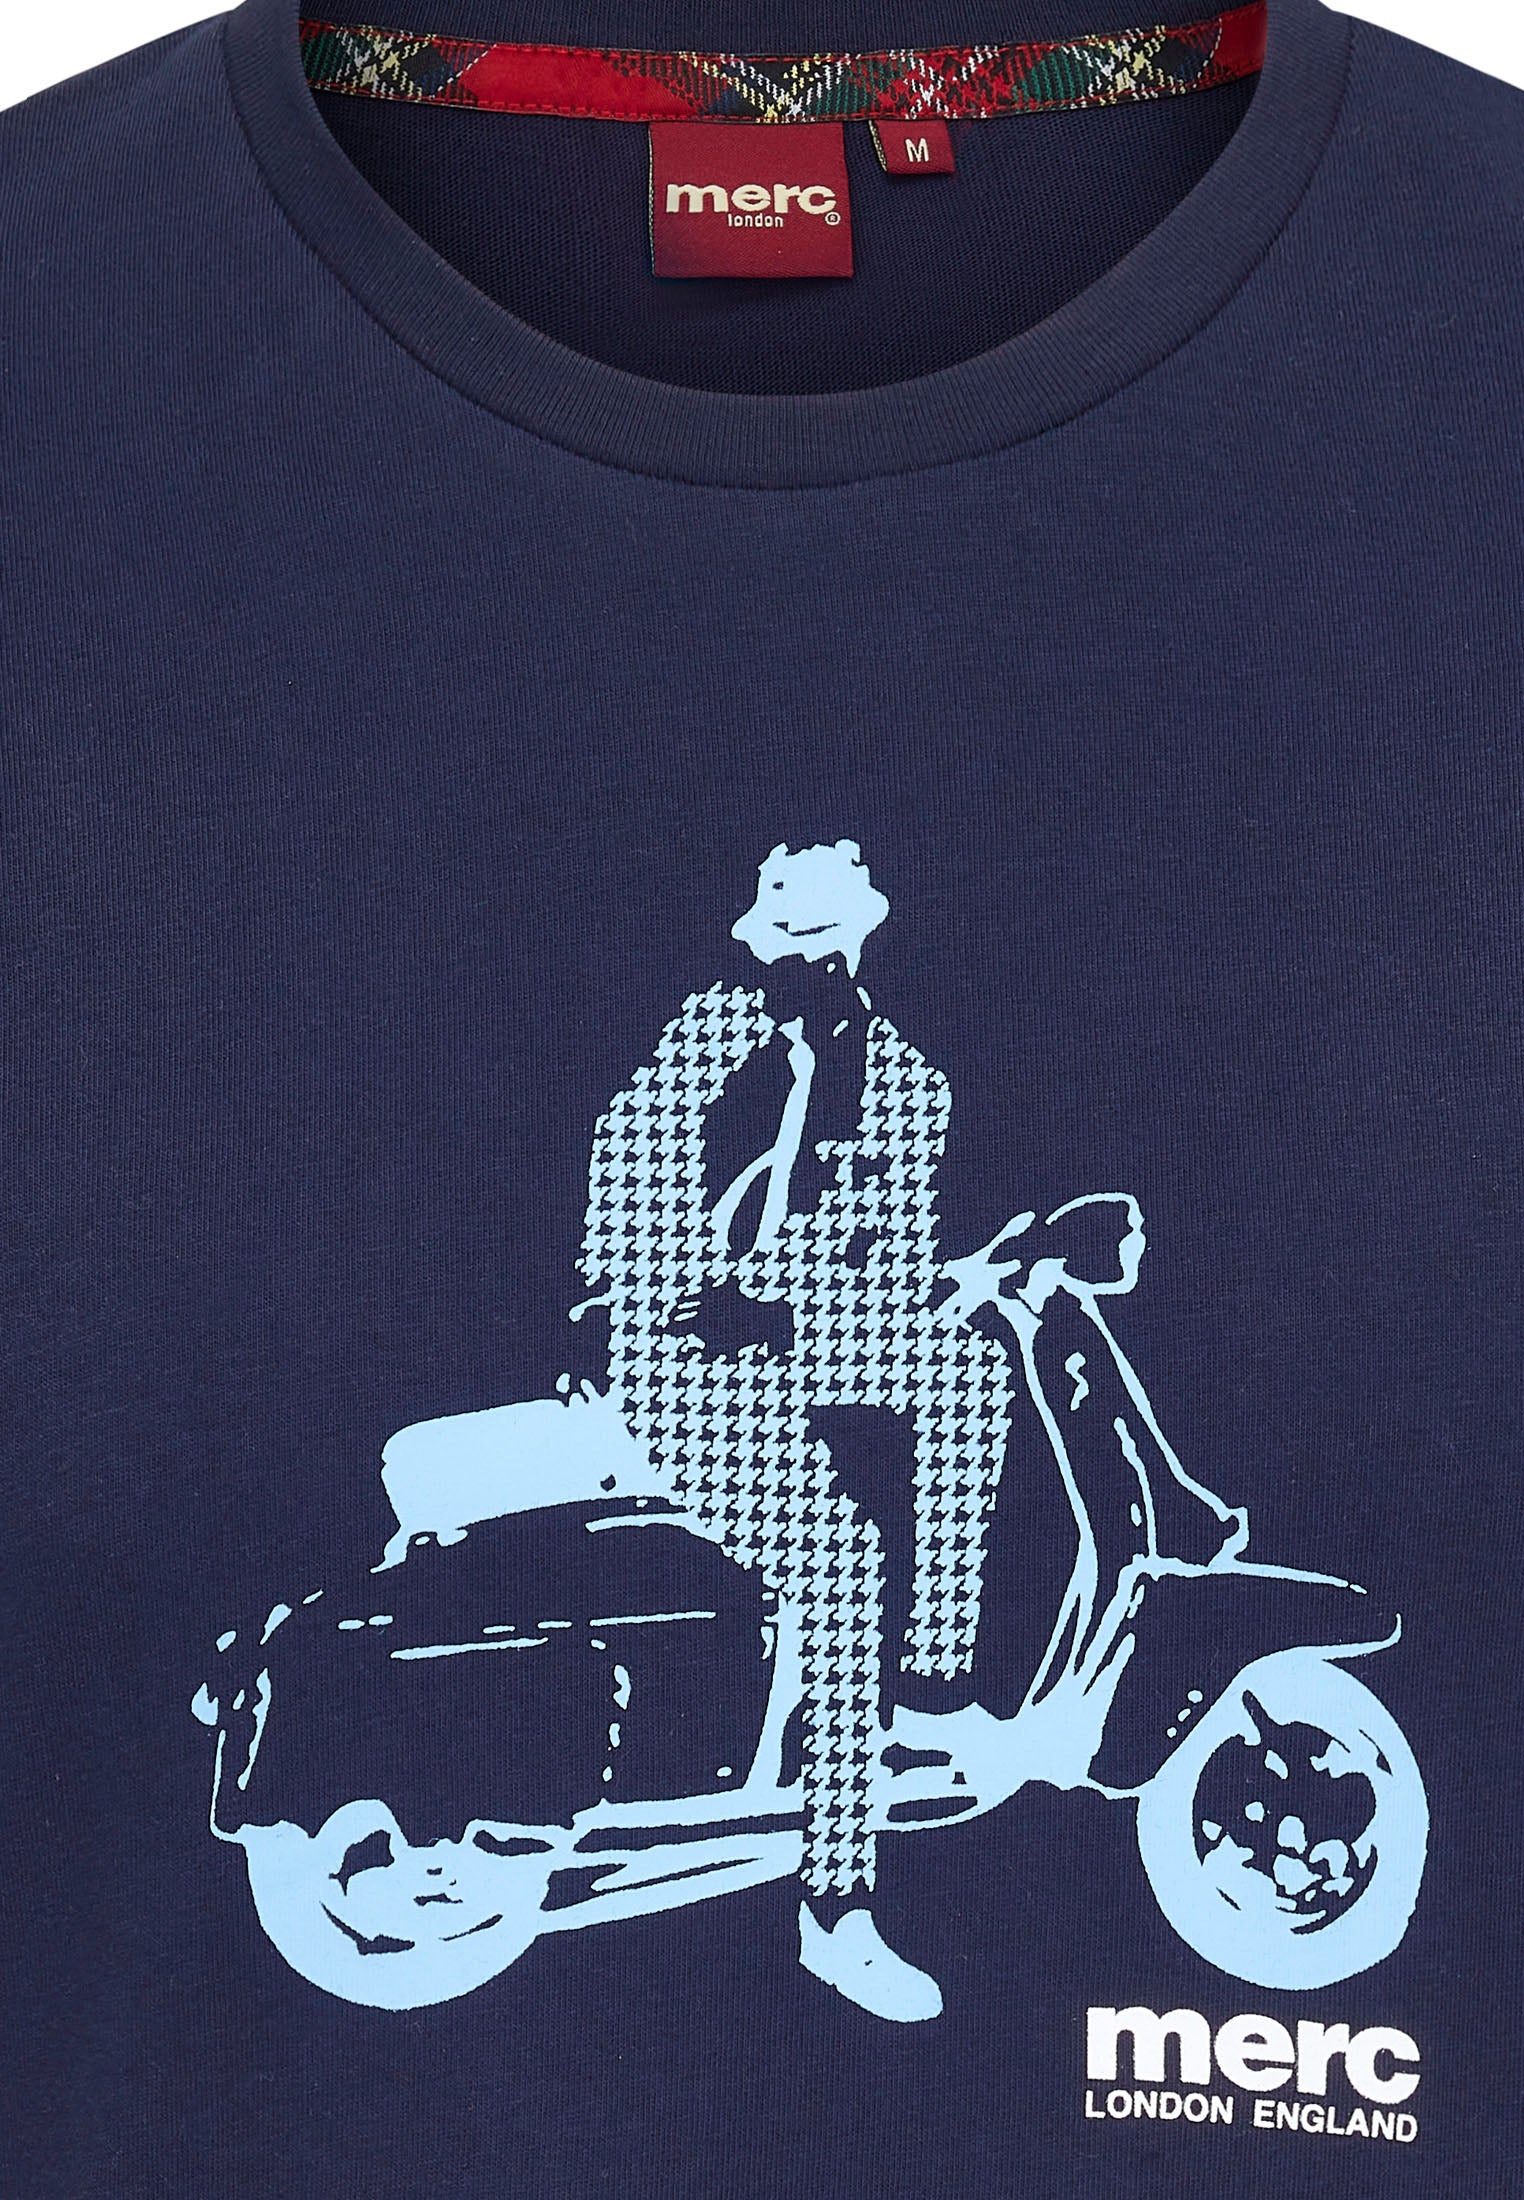 Printed T-Shirt by Merc in Blue